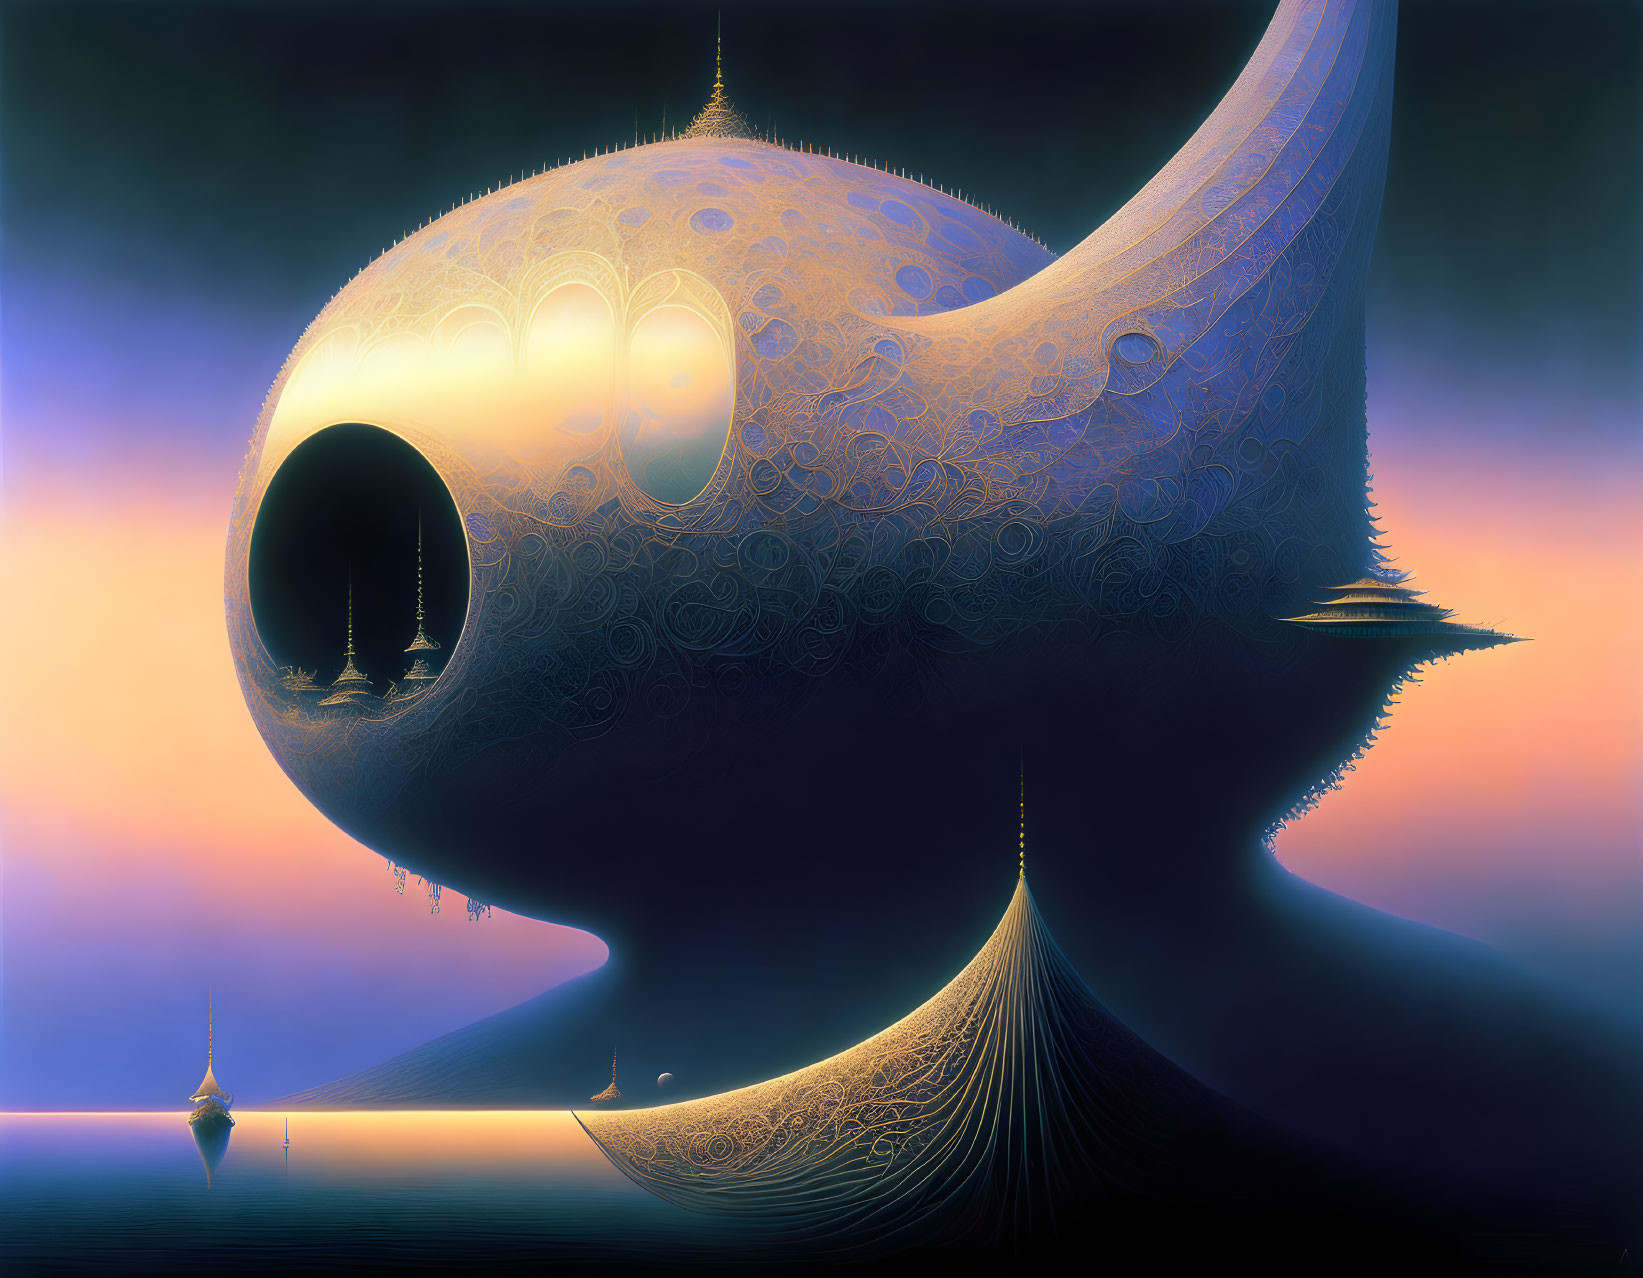 Whale-like surreal creature with intricate patterns in dreamy landscape